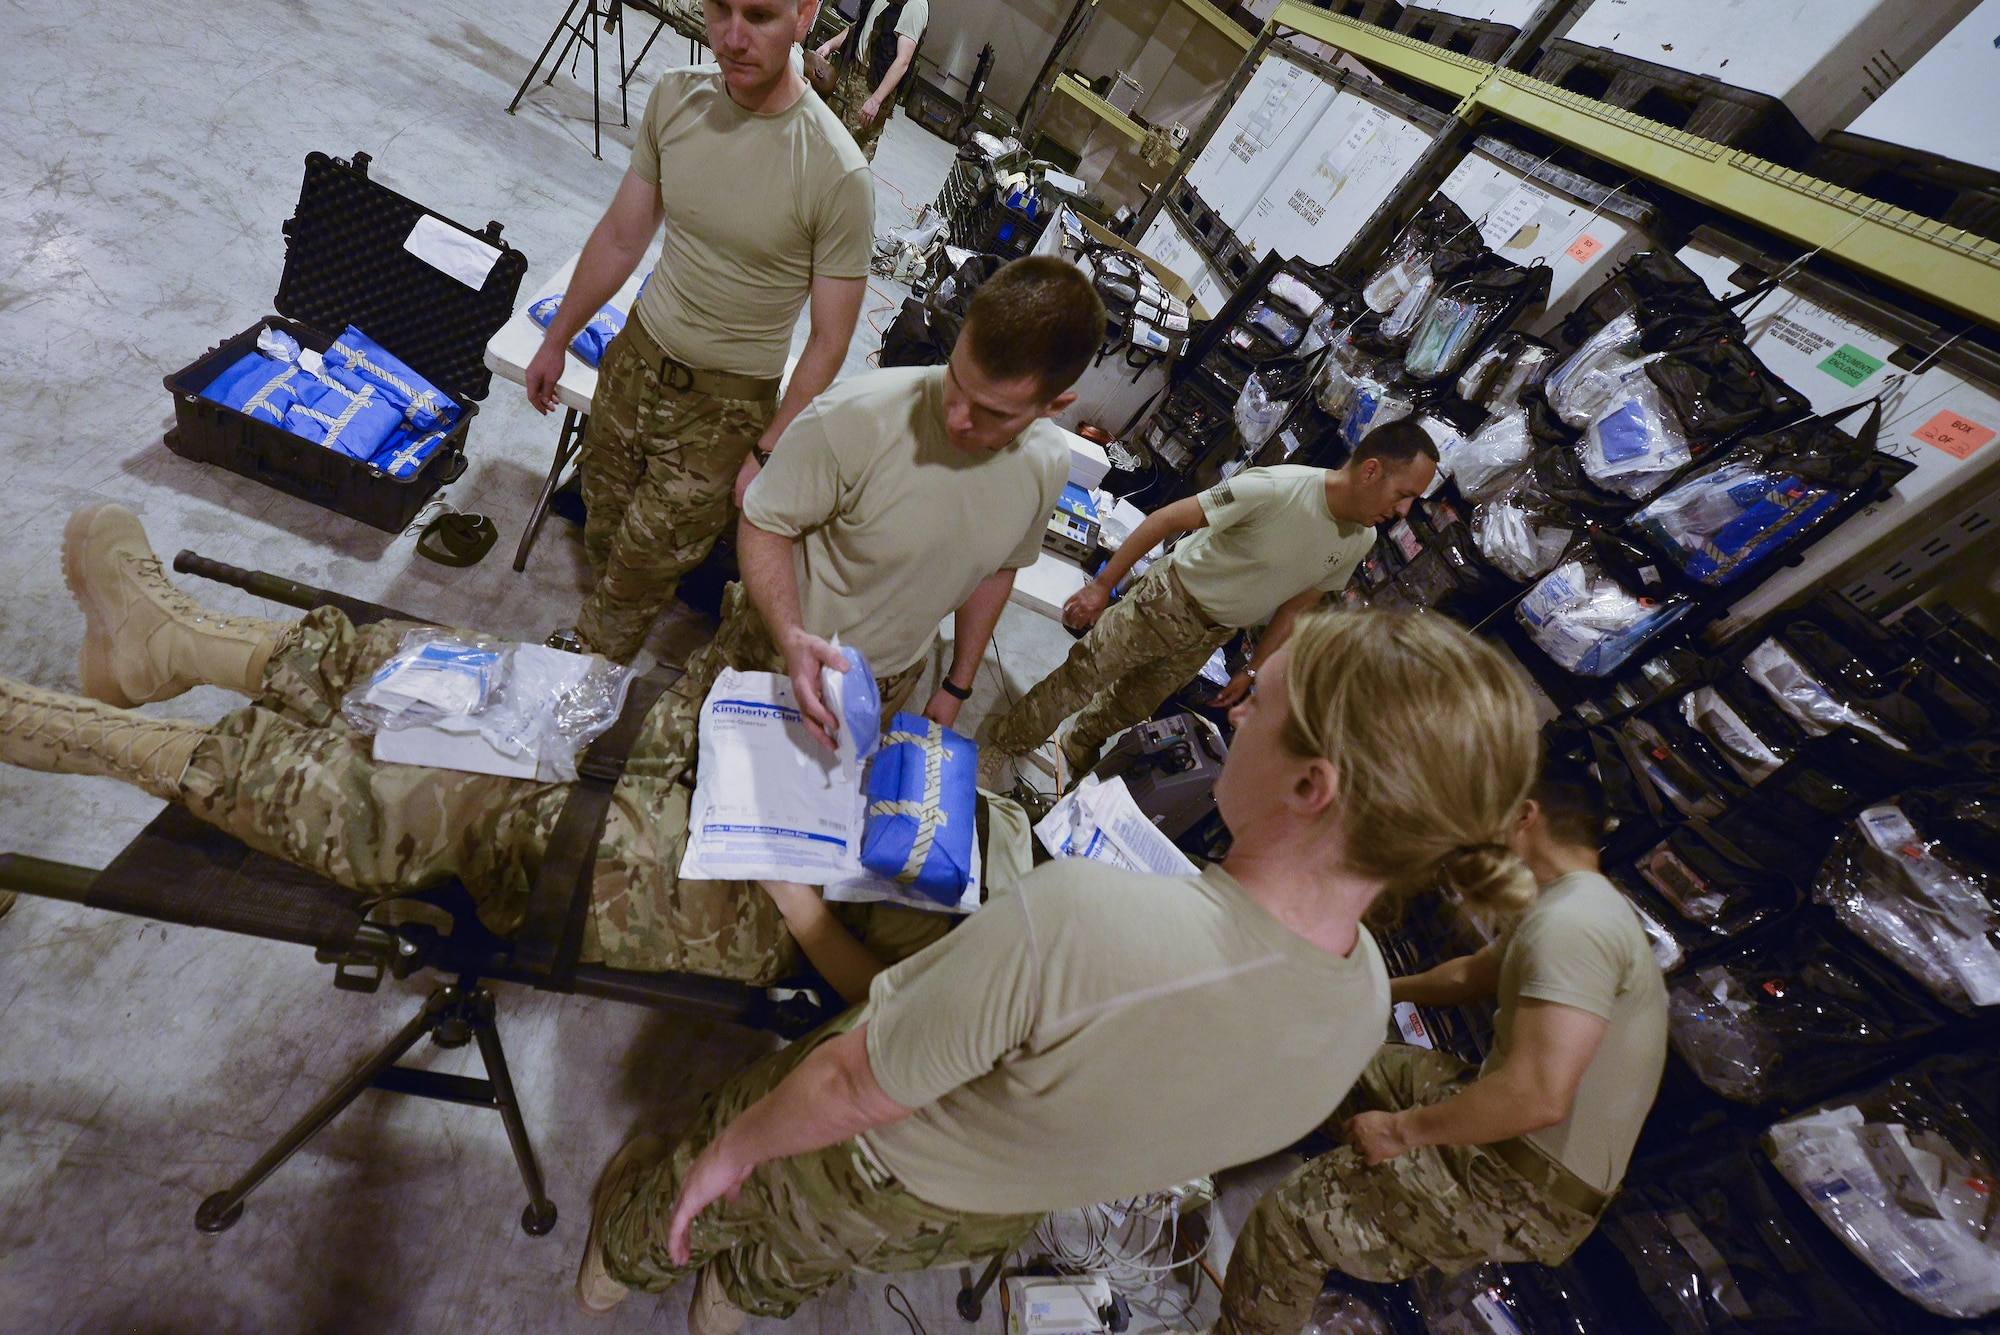 Airmen part of the 379th Expeditionary Medical Group Mobile Field Surgical Team discuss the actions and supplies needed during a timed training scenario to help with familiarization training August 28, 2015 at Al Udeid Air Base, Qatar. (U.S. Air Force photo/Staff Sgt. Alexandre Montes)